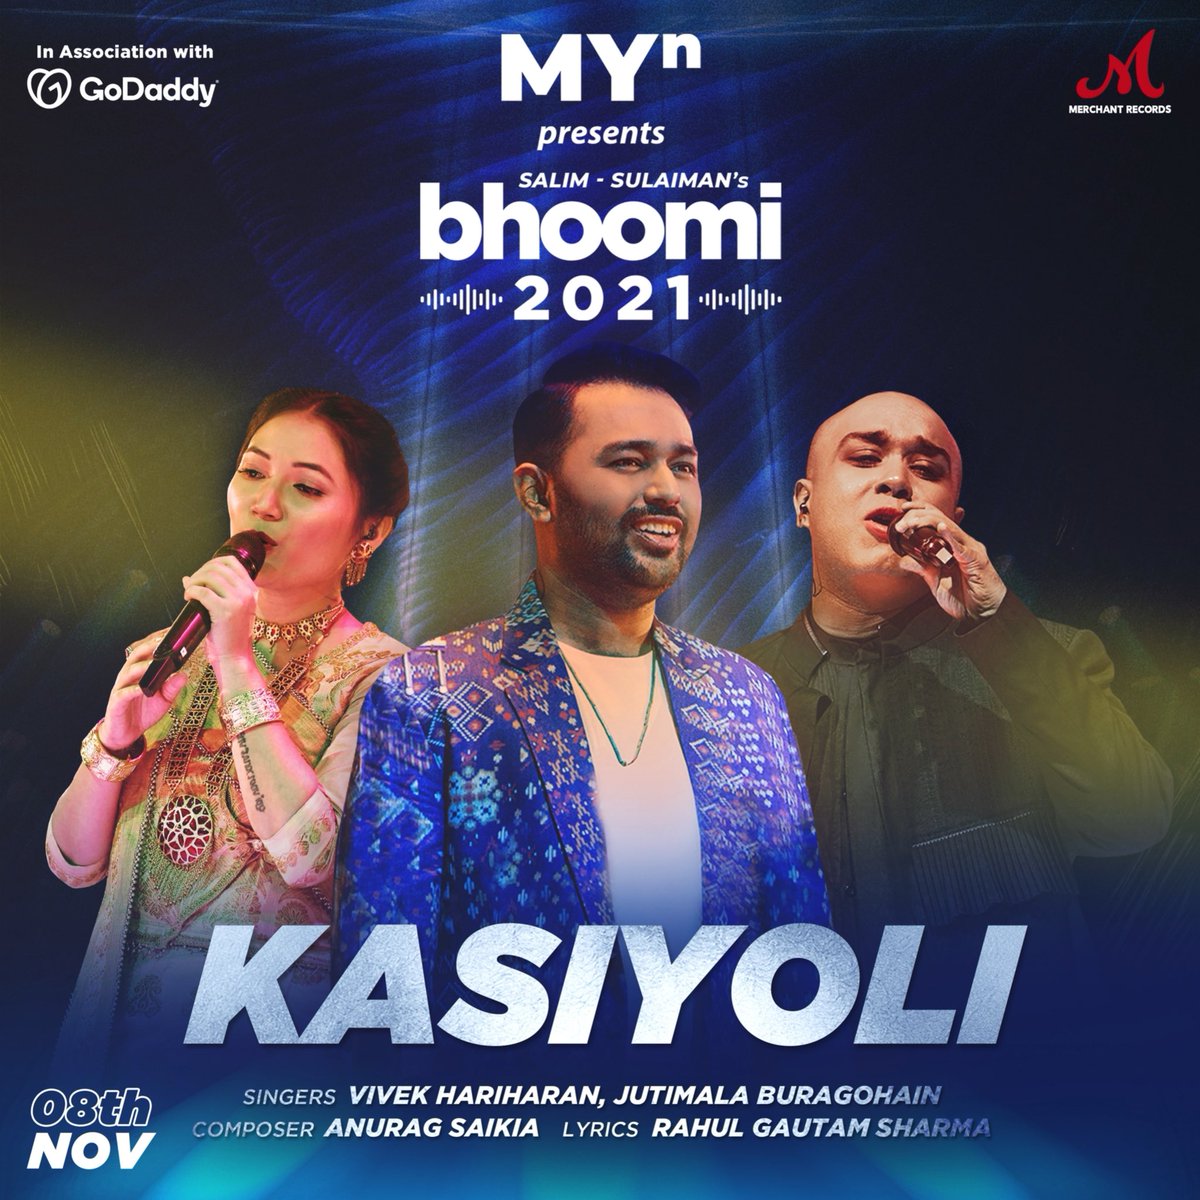 The 4th song of #bhoomi21 is Kasiyoli composed by the genius @AnuraagPsychaea featuring @vivekhariharan5 & @Jutimala94 .
Written by Rahul Gautam Sharma 

This song is truly a masterpiece & has some really beautiful guitars by Ishan Das 

Releasing on 8th November